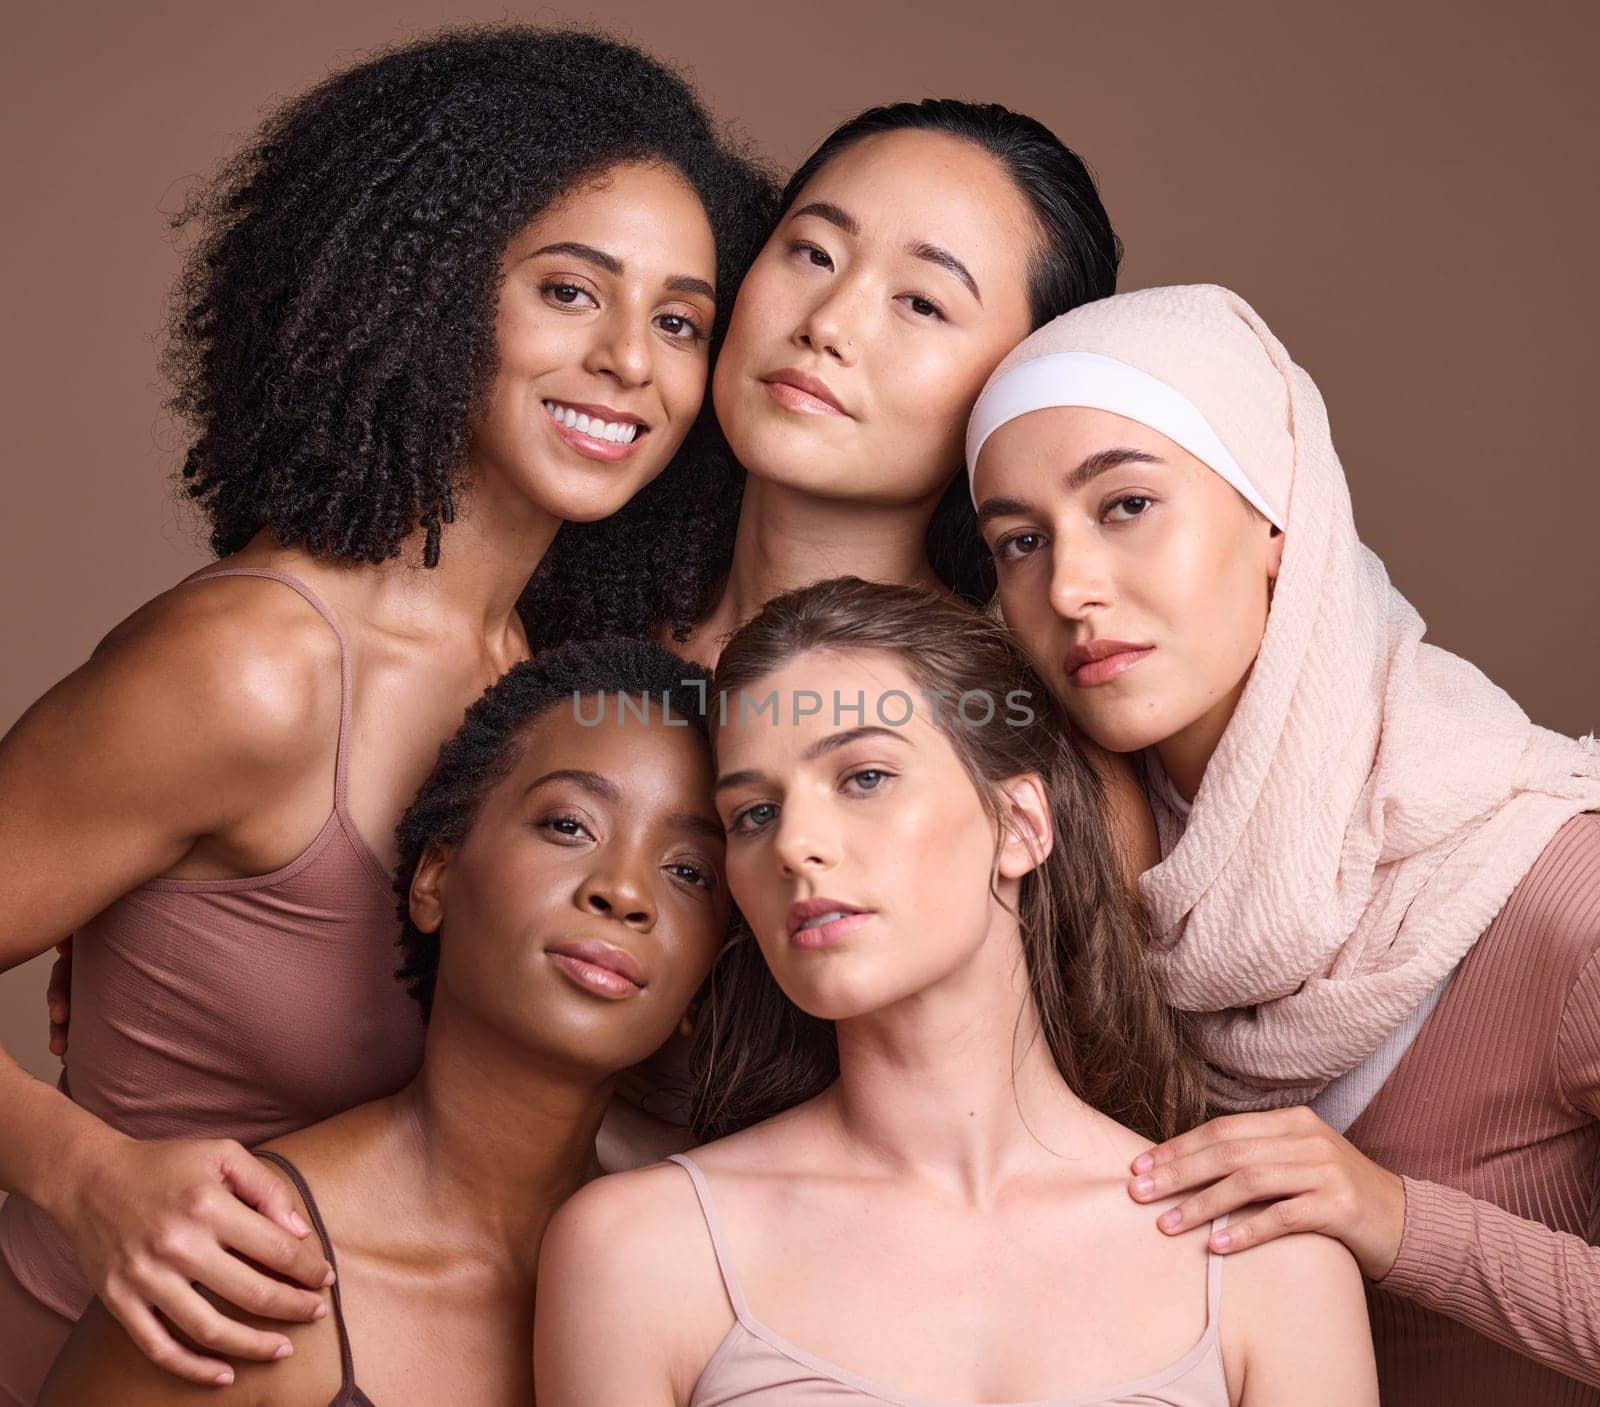 Diversity, beauty and portrait of a group of women in studio for skincare, makeup or cosmetic routine. Feminism, female empowerment and face of multicultural girl friends isolated by brown background.